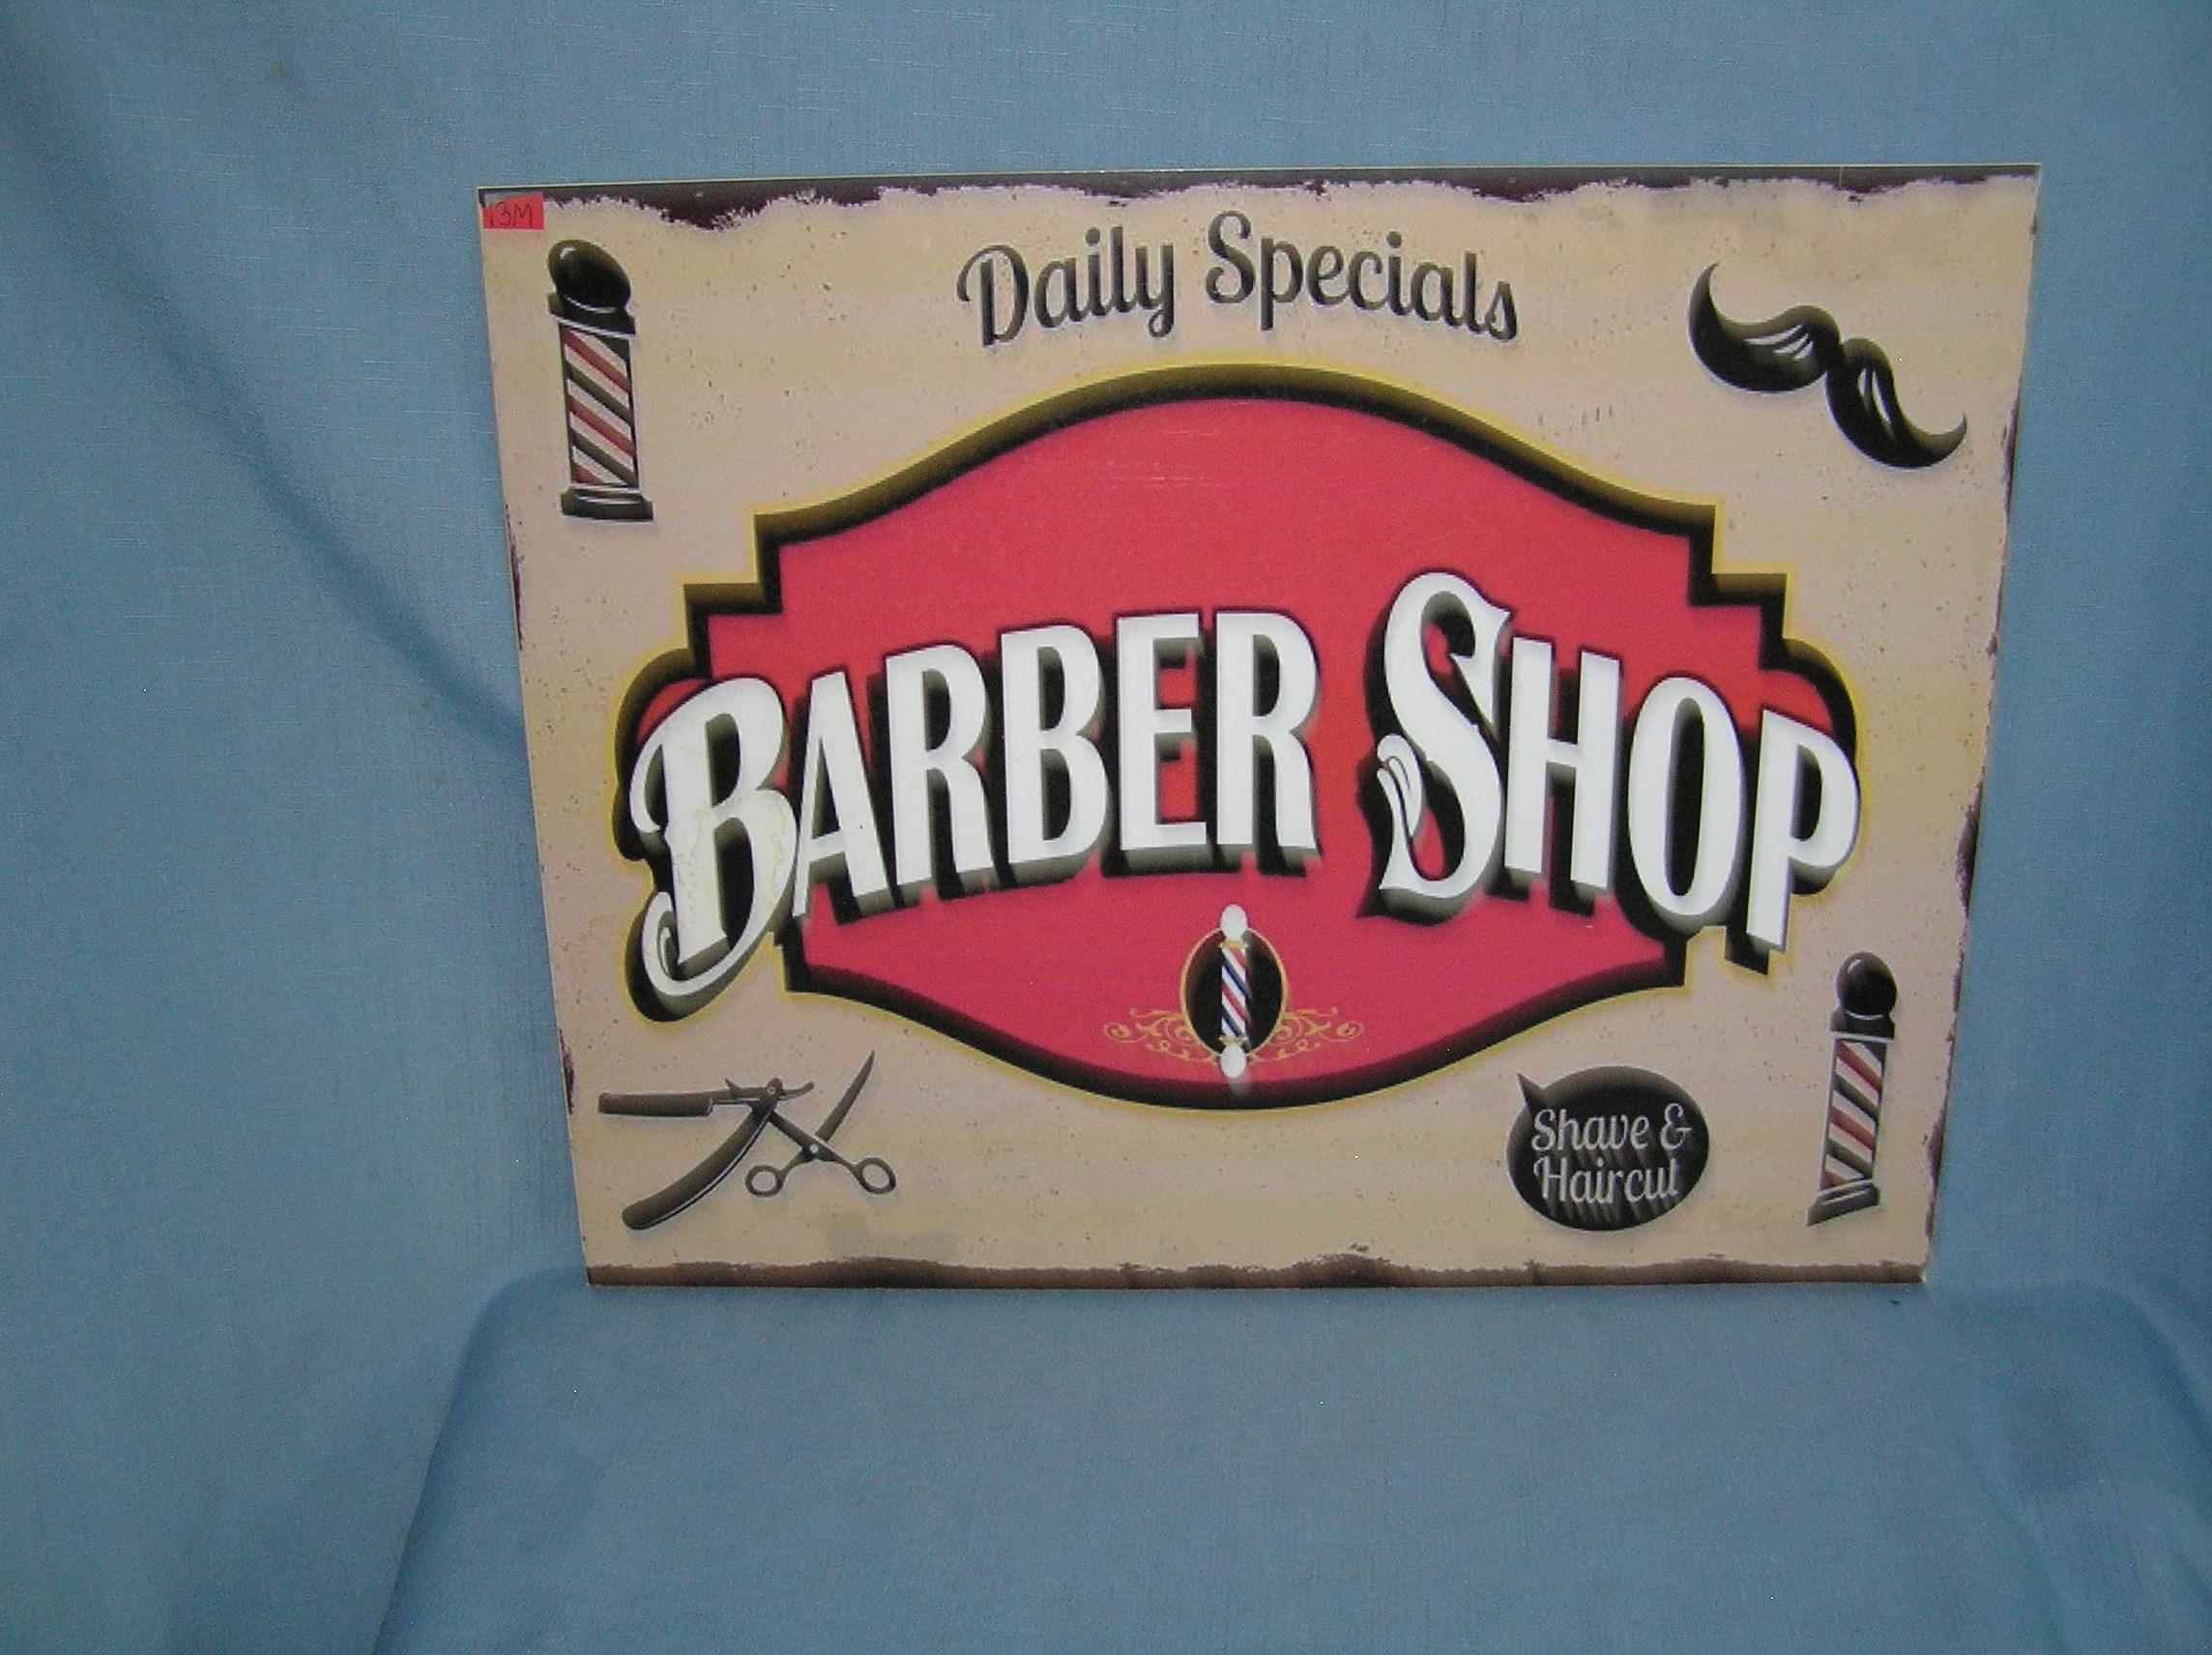 Barber shop retro style advertising sign